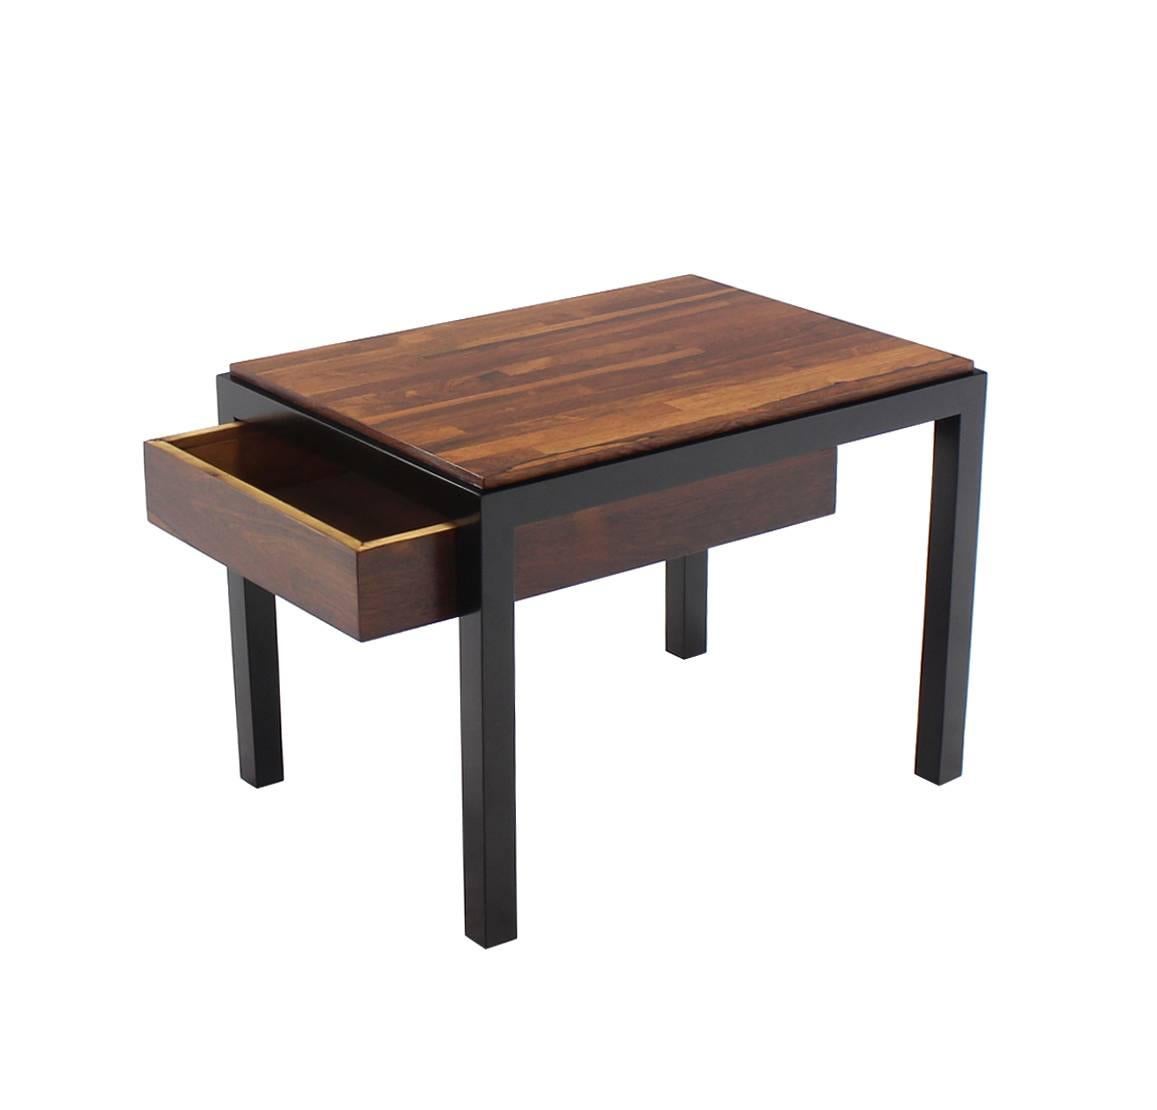 Very nice Mid-Century Modern rosewood end table.